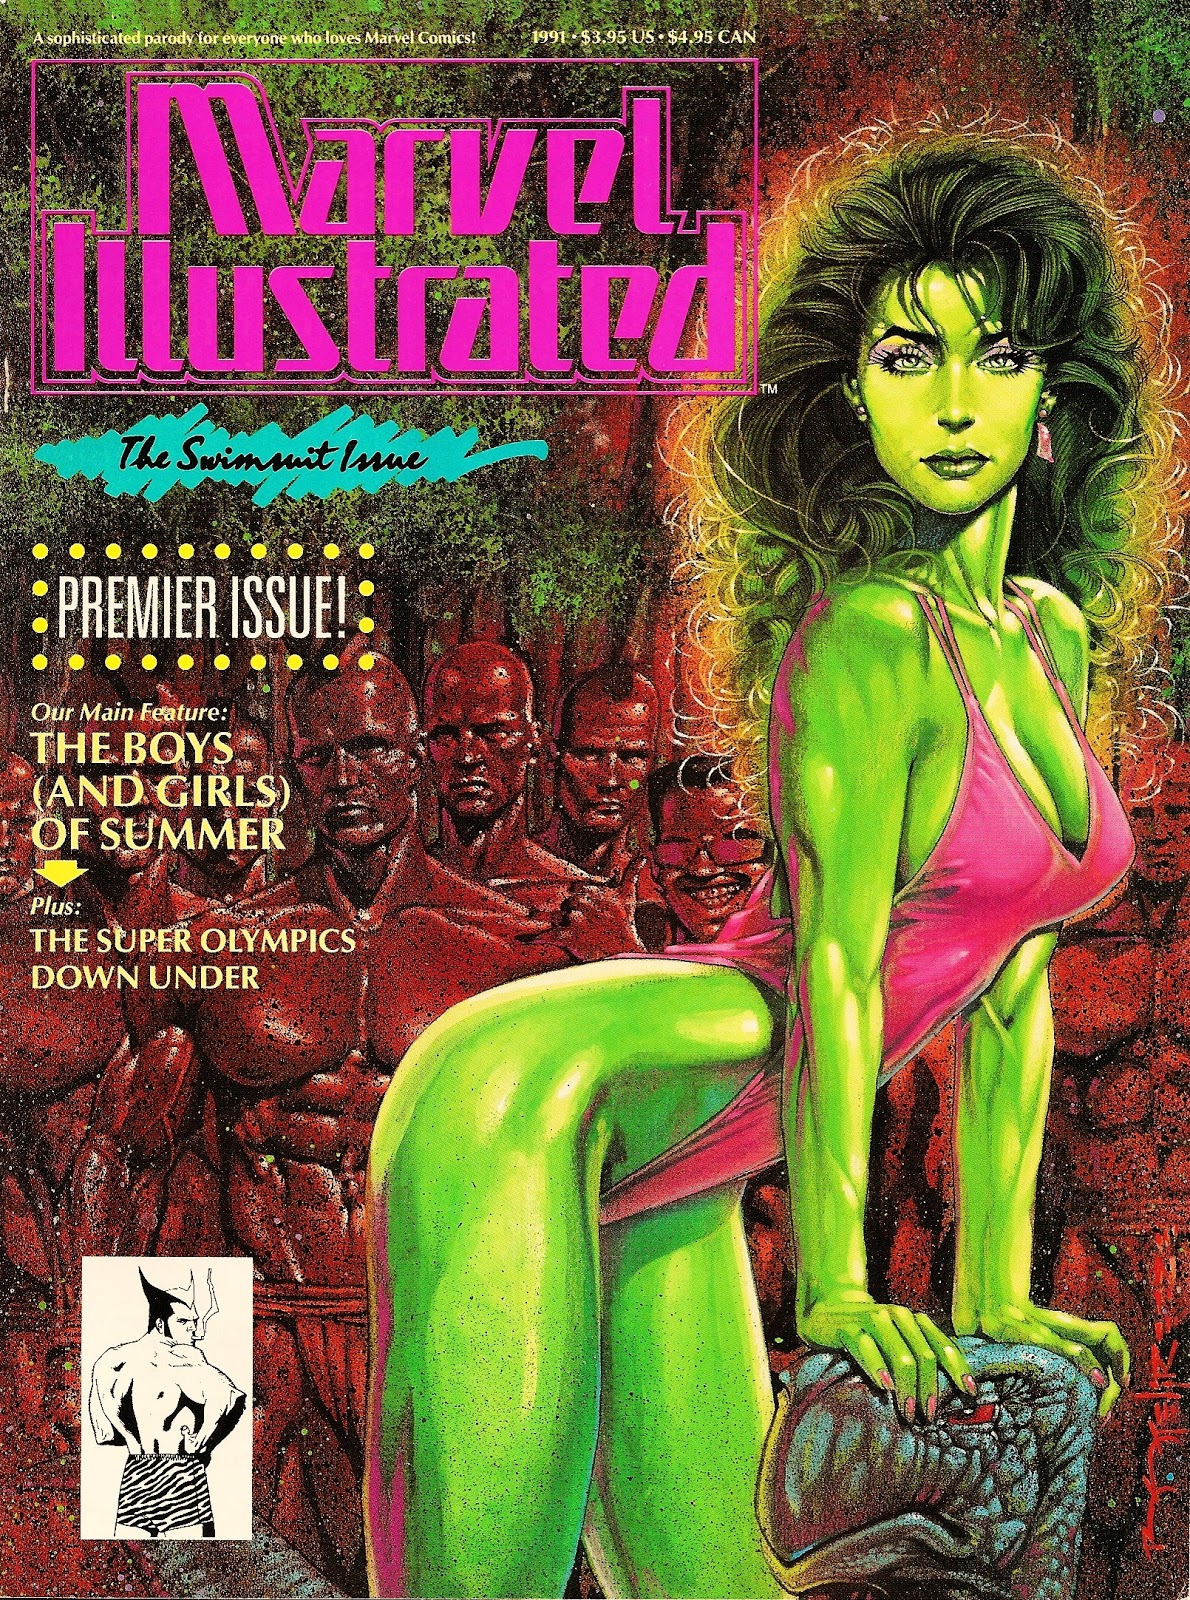 marvel illustrated swimsuit issue - Avel Illustratti is the fournit luna The Swith tut Inue Premier Issue! Our Malature! The Boys And Girls 1 Of Summer Plus The Super Olympics Down Under